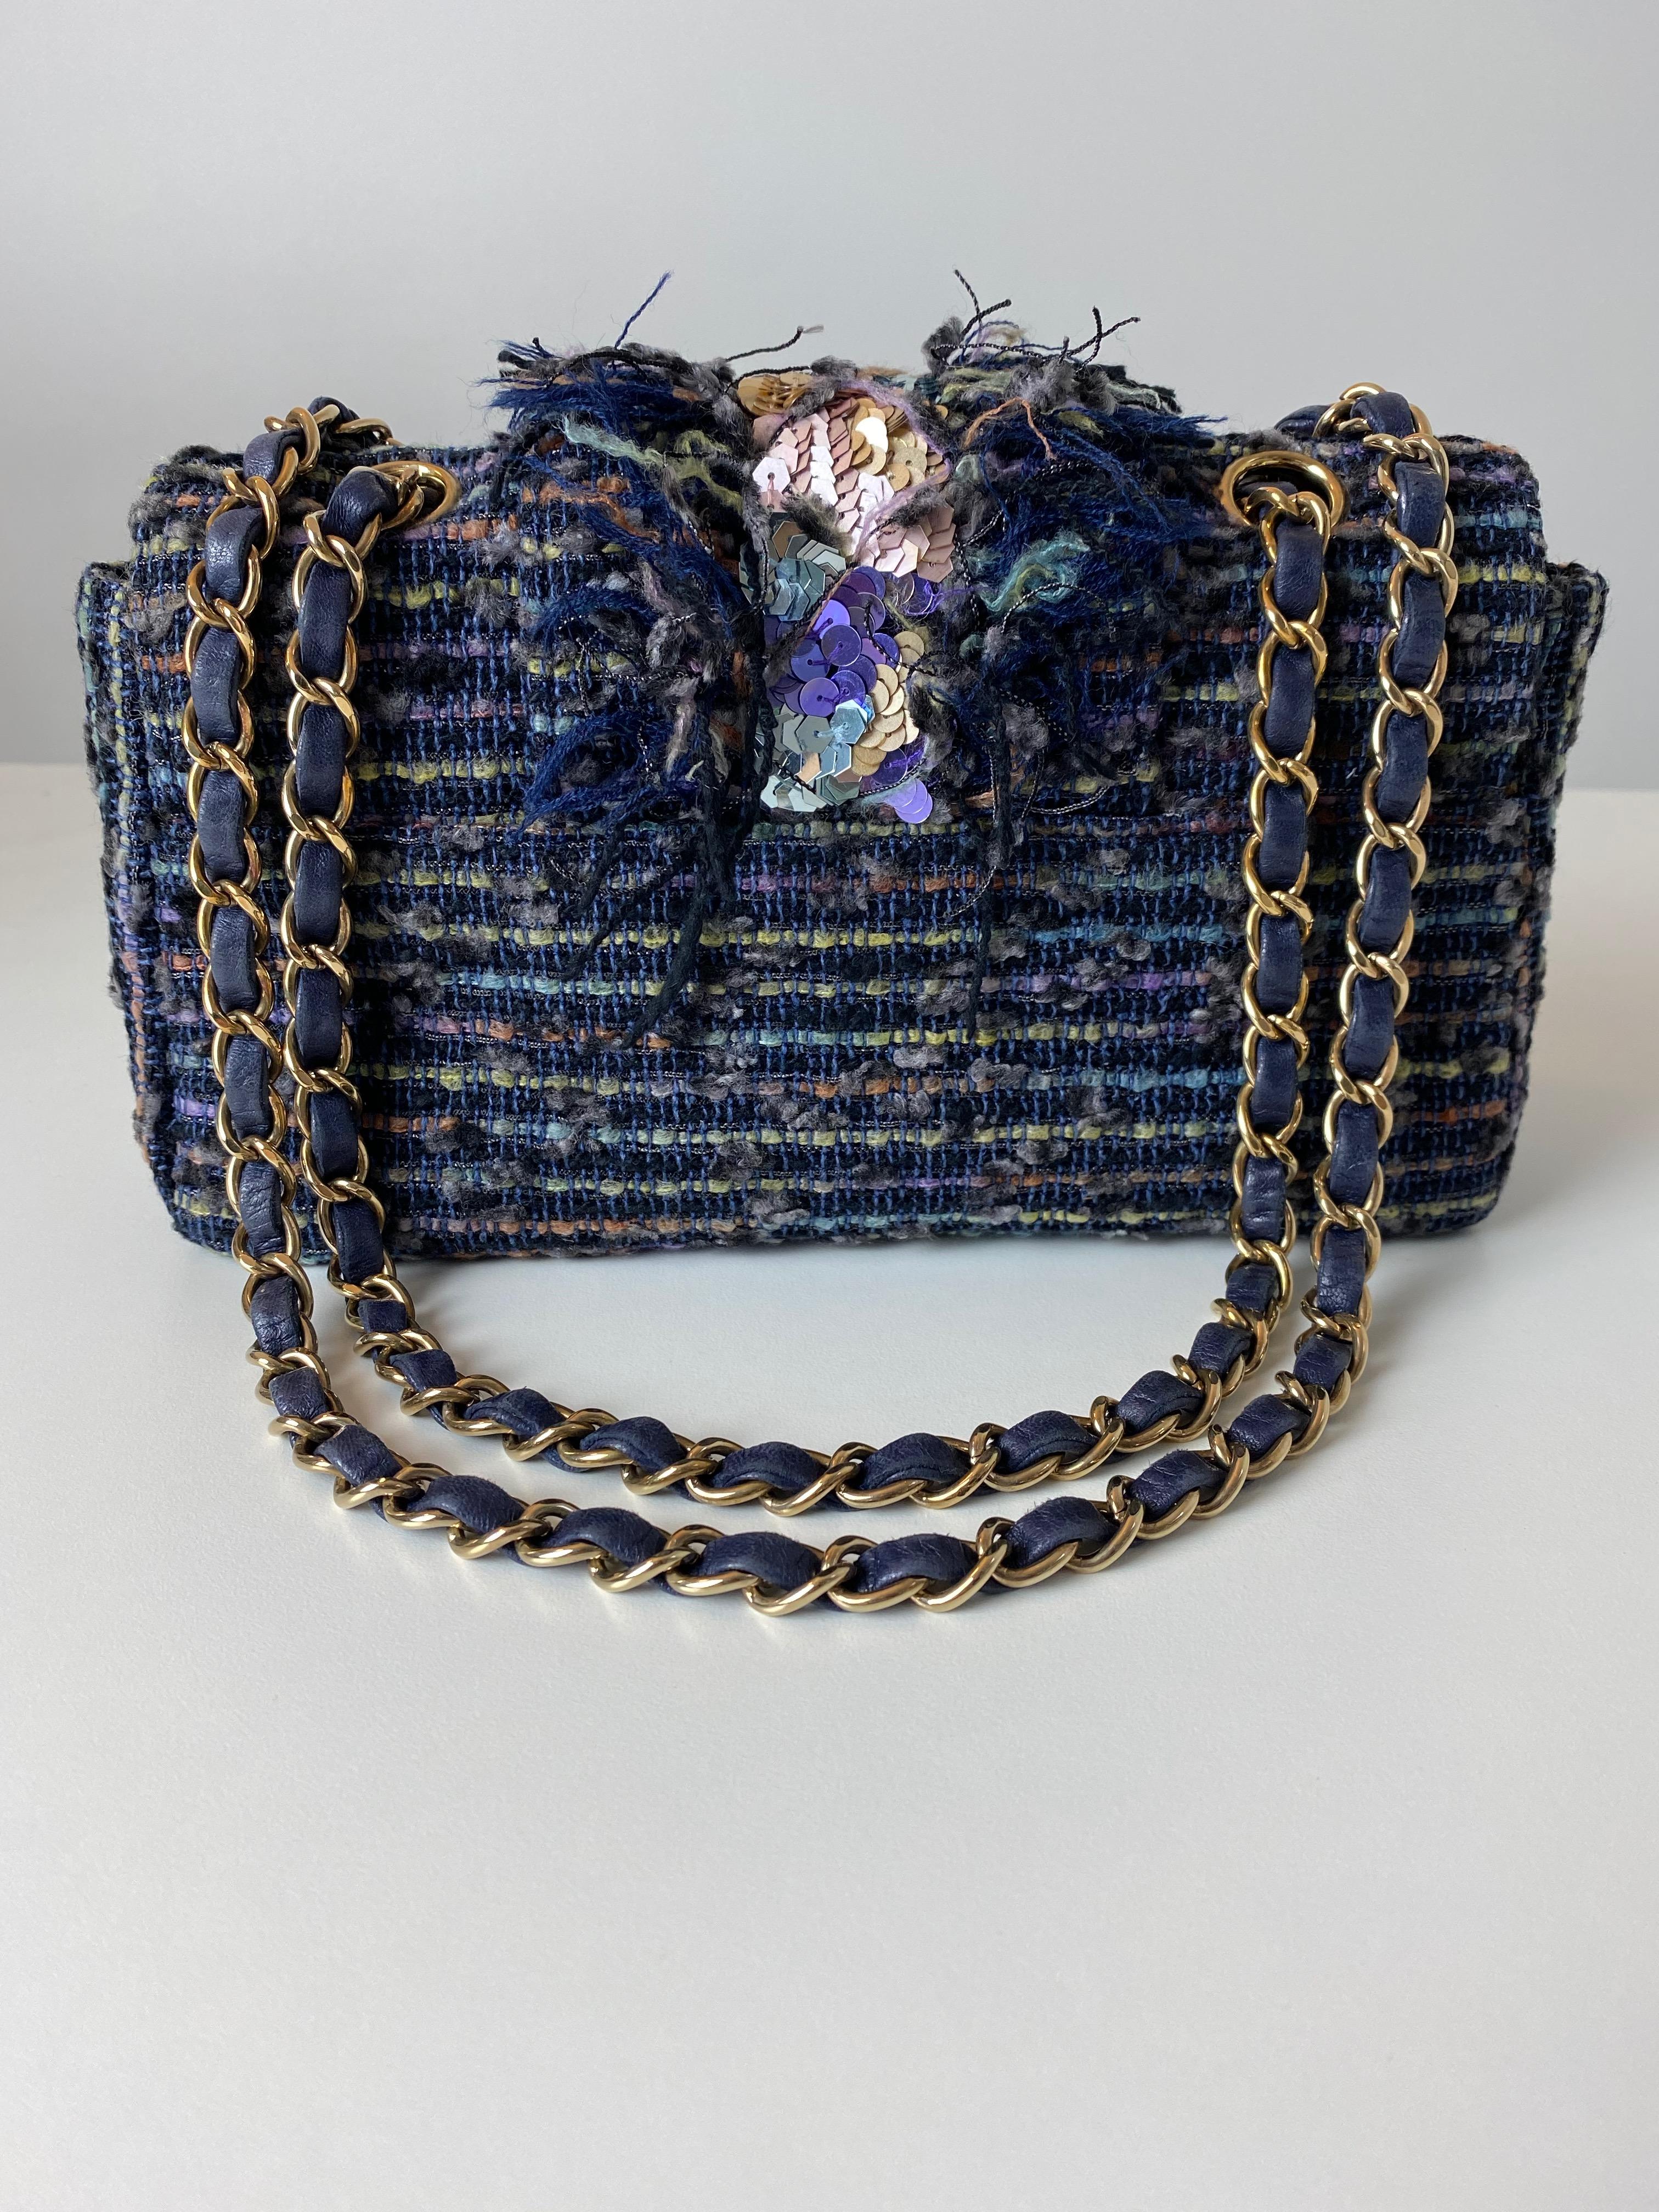 Chanel 2005 Classic Flap Vintage Jeweled Sequin Mermaid Navy Blue Tweed Bag For Sale 2